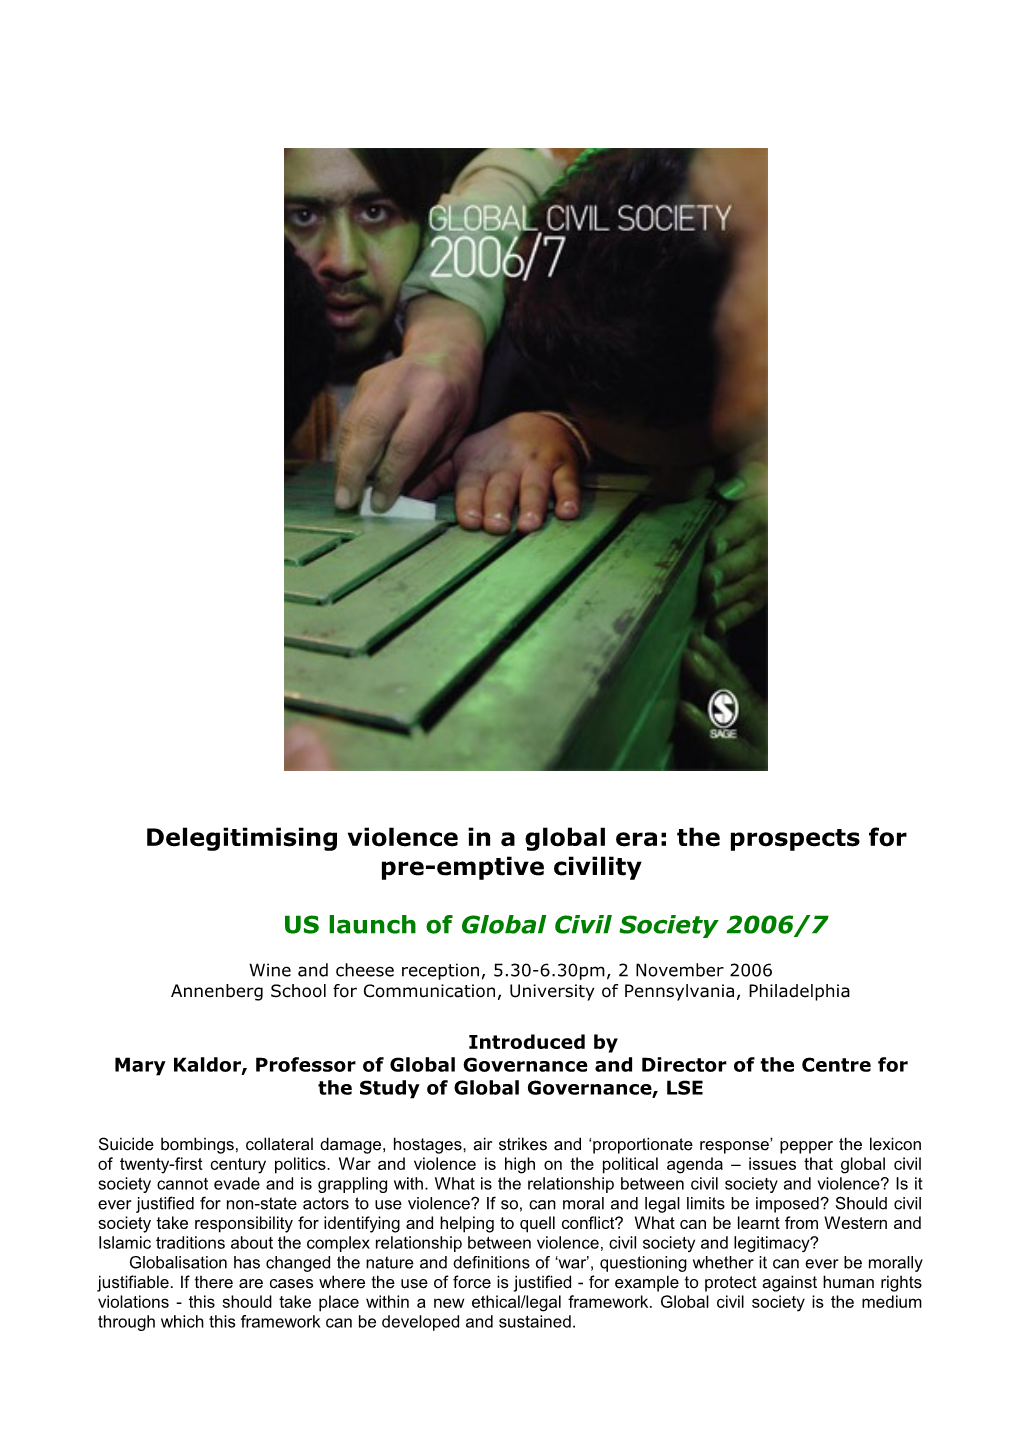 Delegitimising Violence in a Global Era: the Prospects for Pre-Emptive Civility